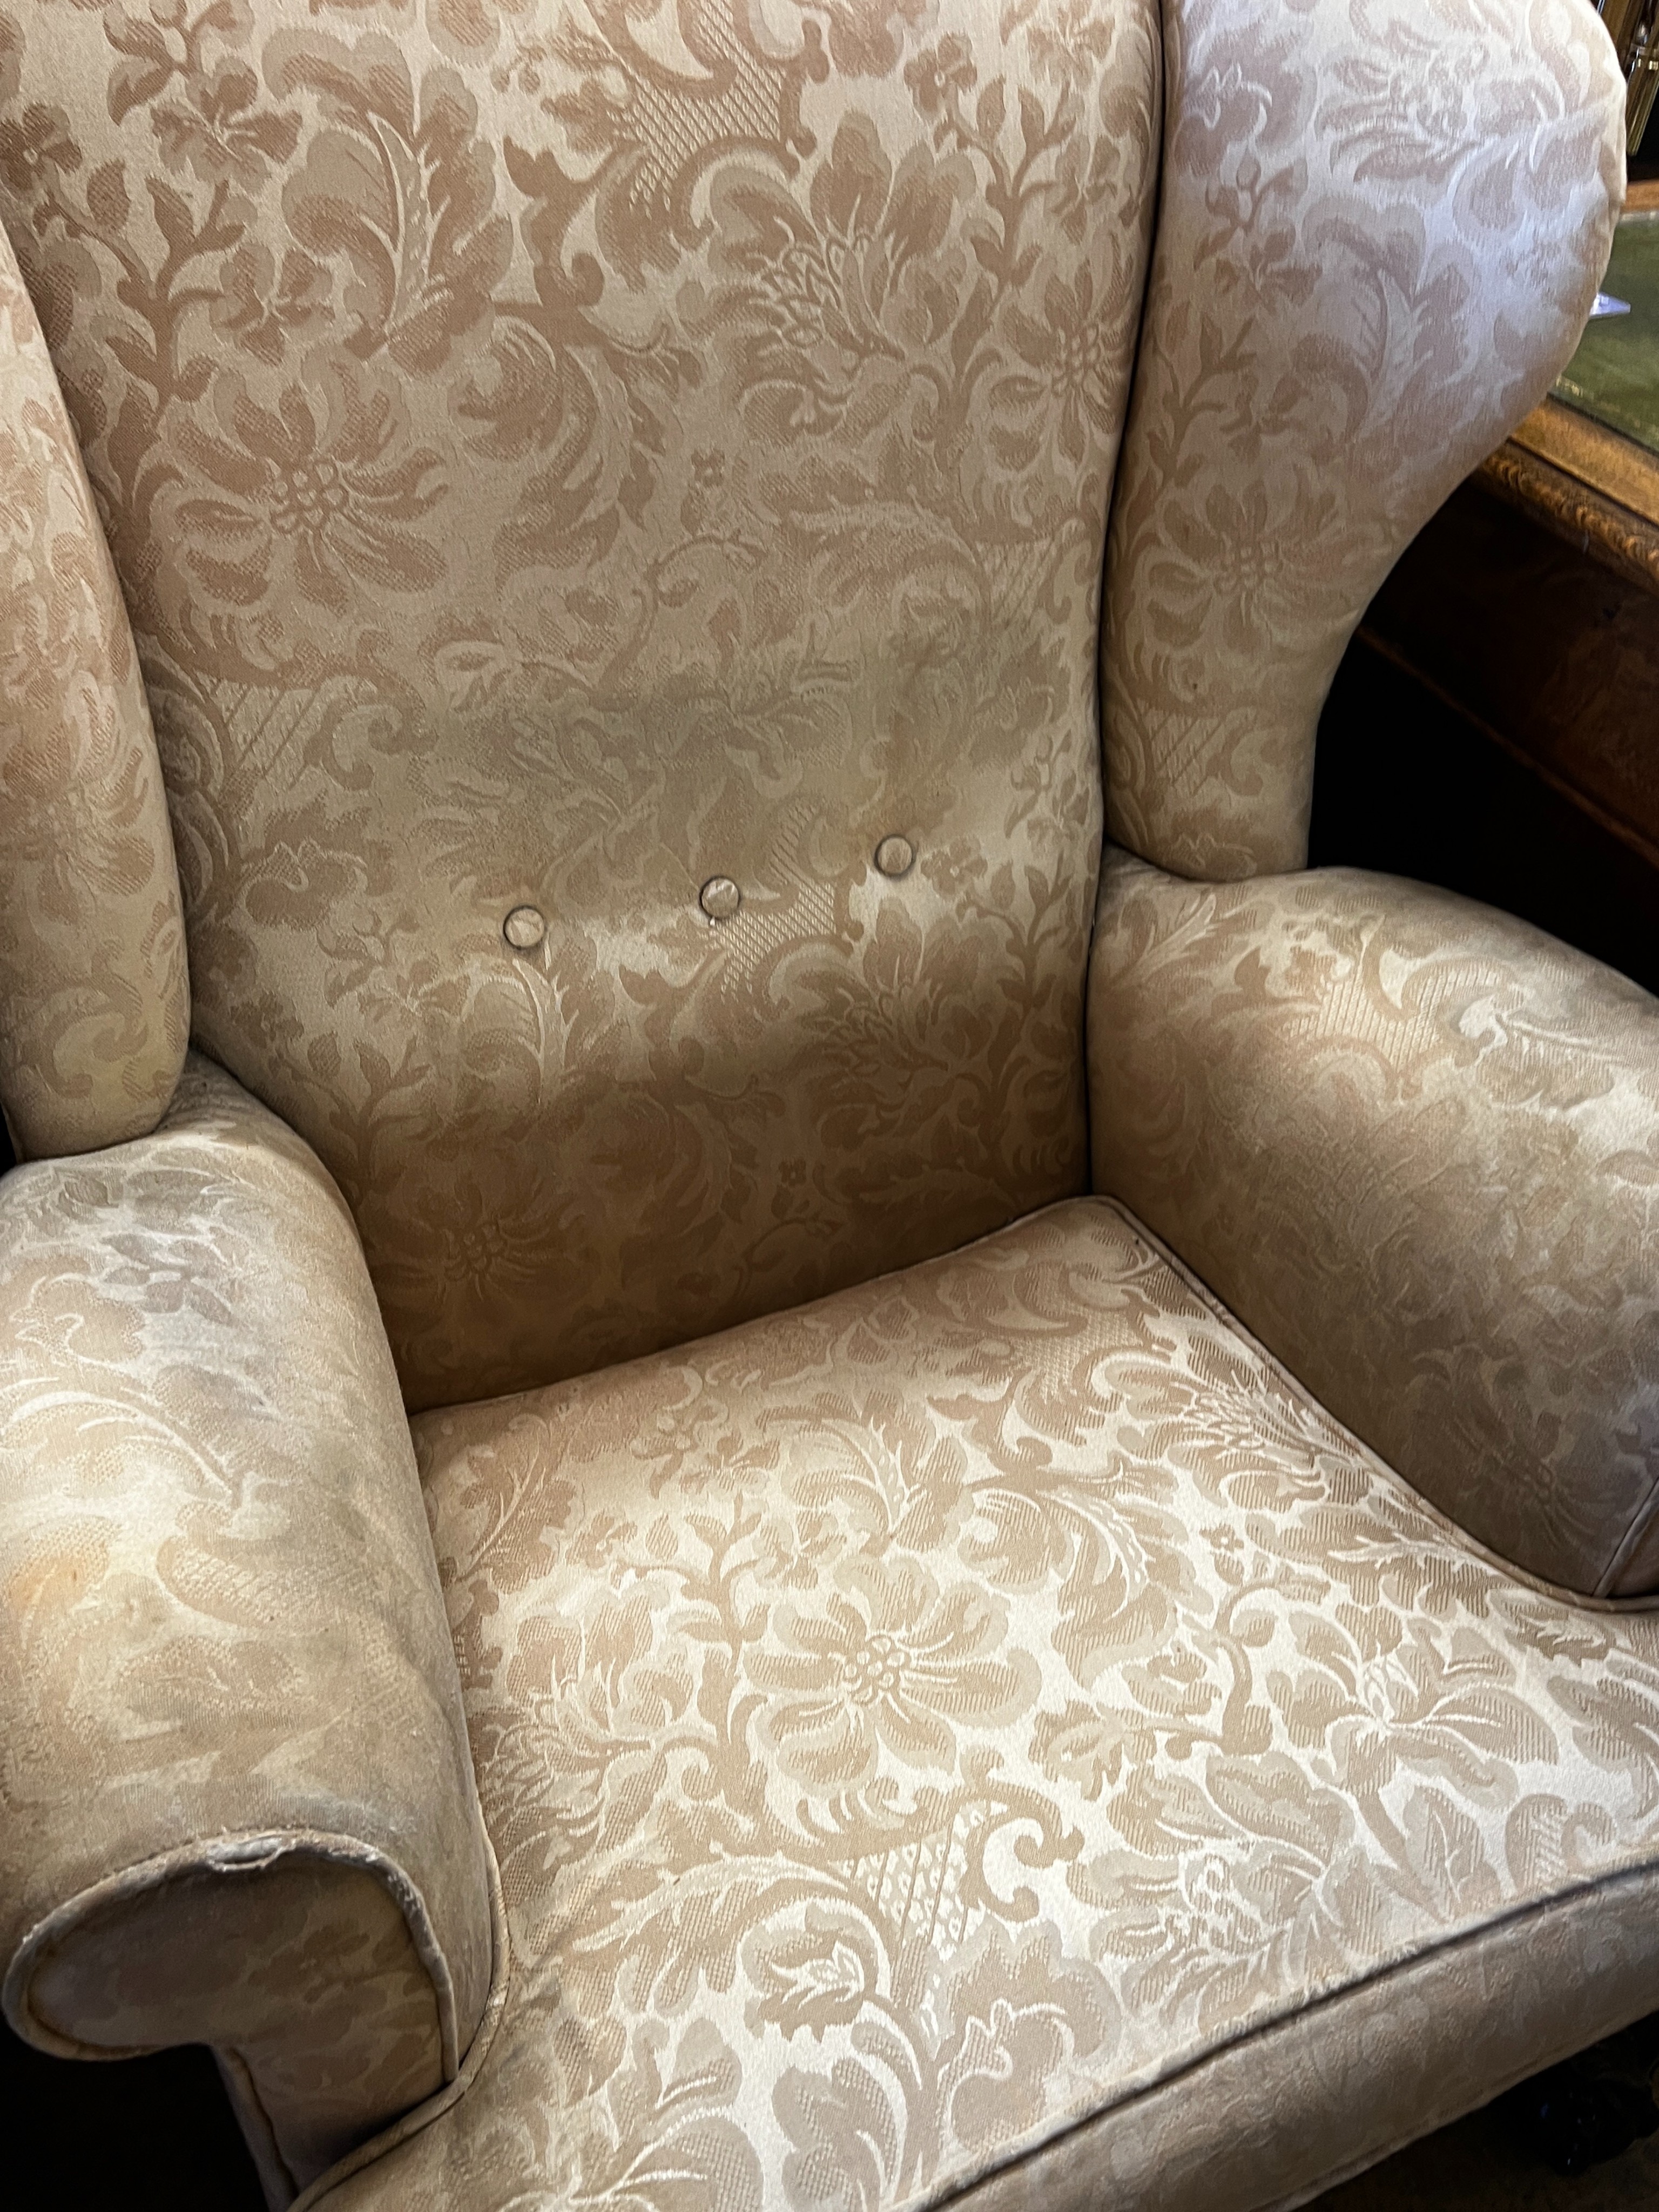 An early 20th century George III style upholstered armchair, width 80cm, depth 74cm, height 104cm